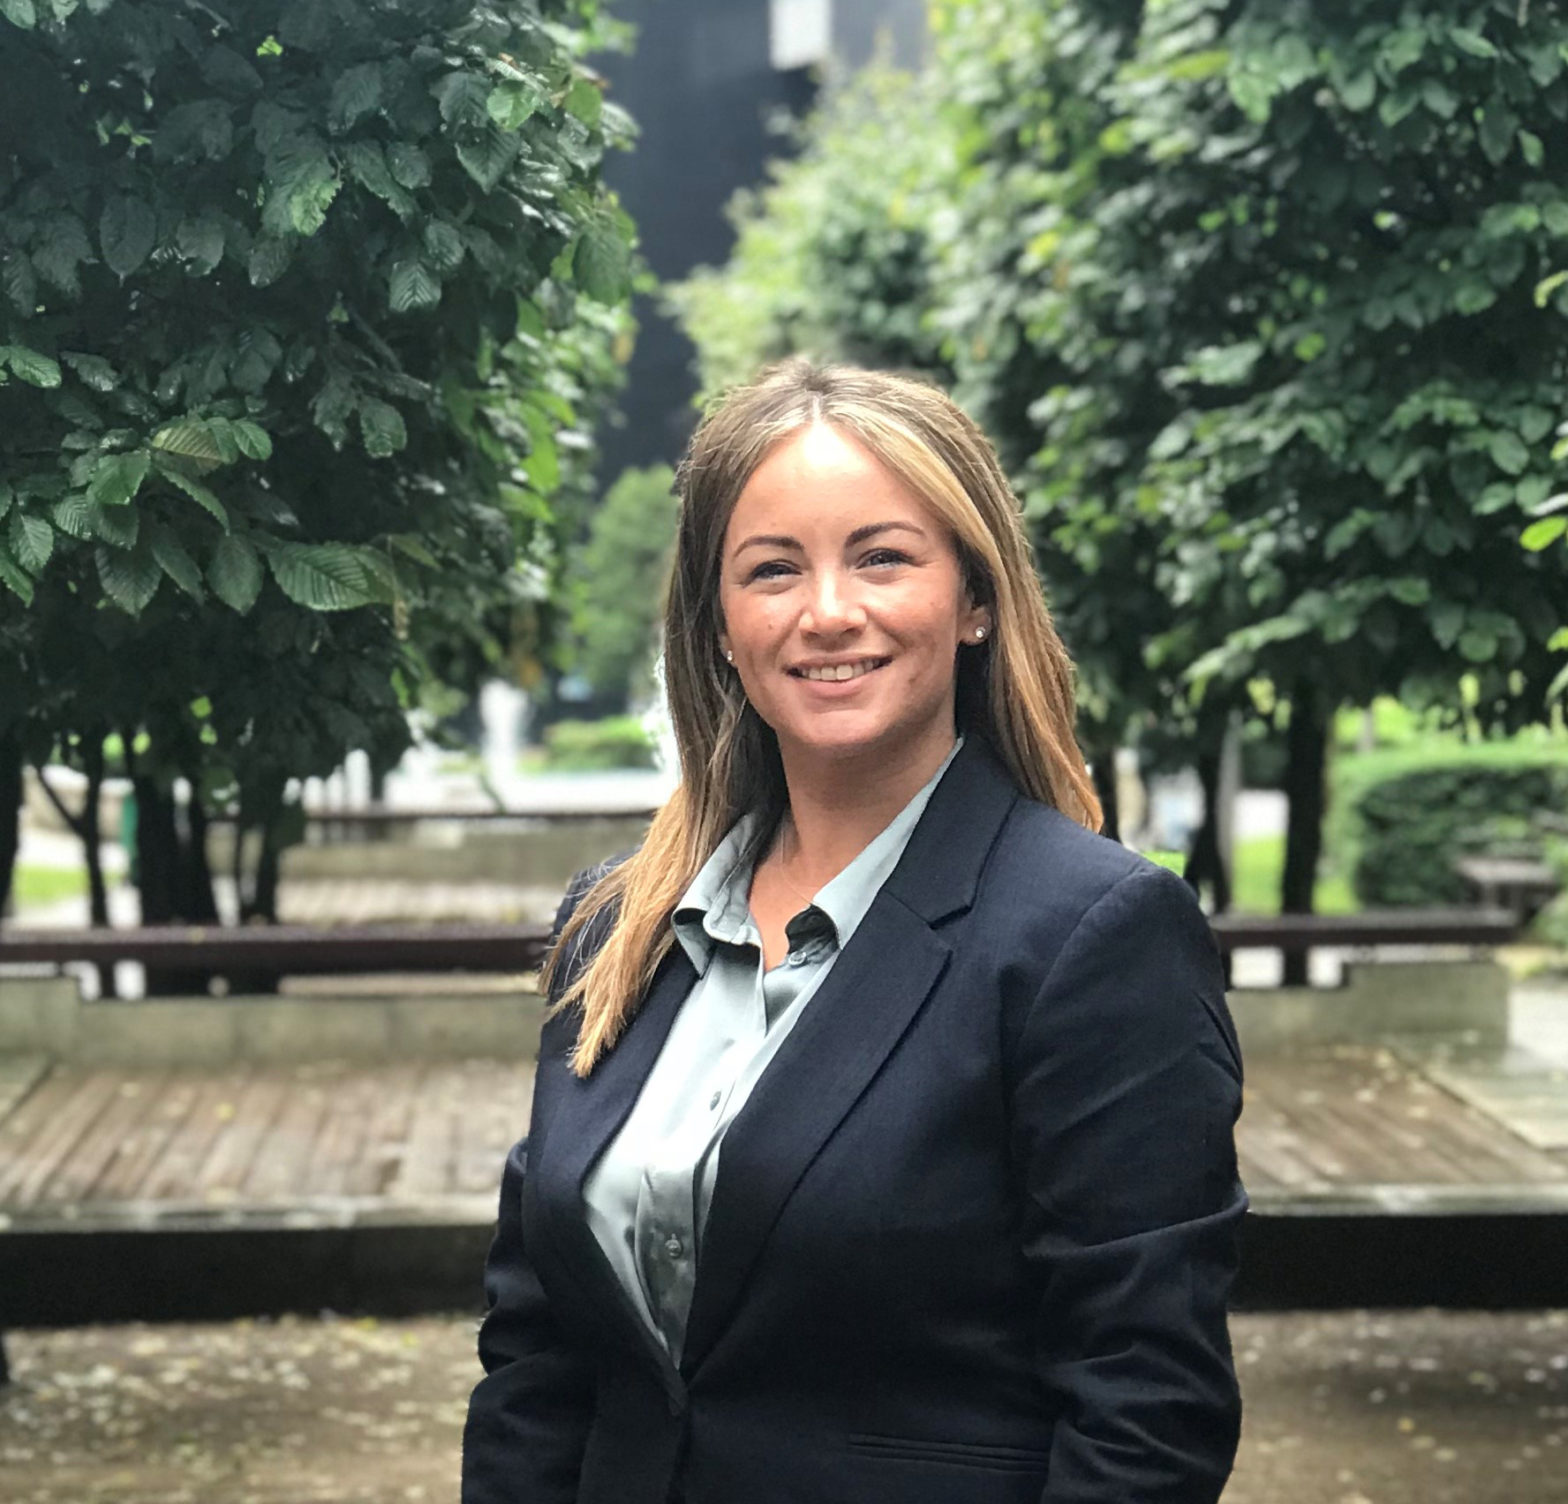 Roma Finance expands new business team, appointing Kirsty Botten as Business Development Manager